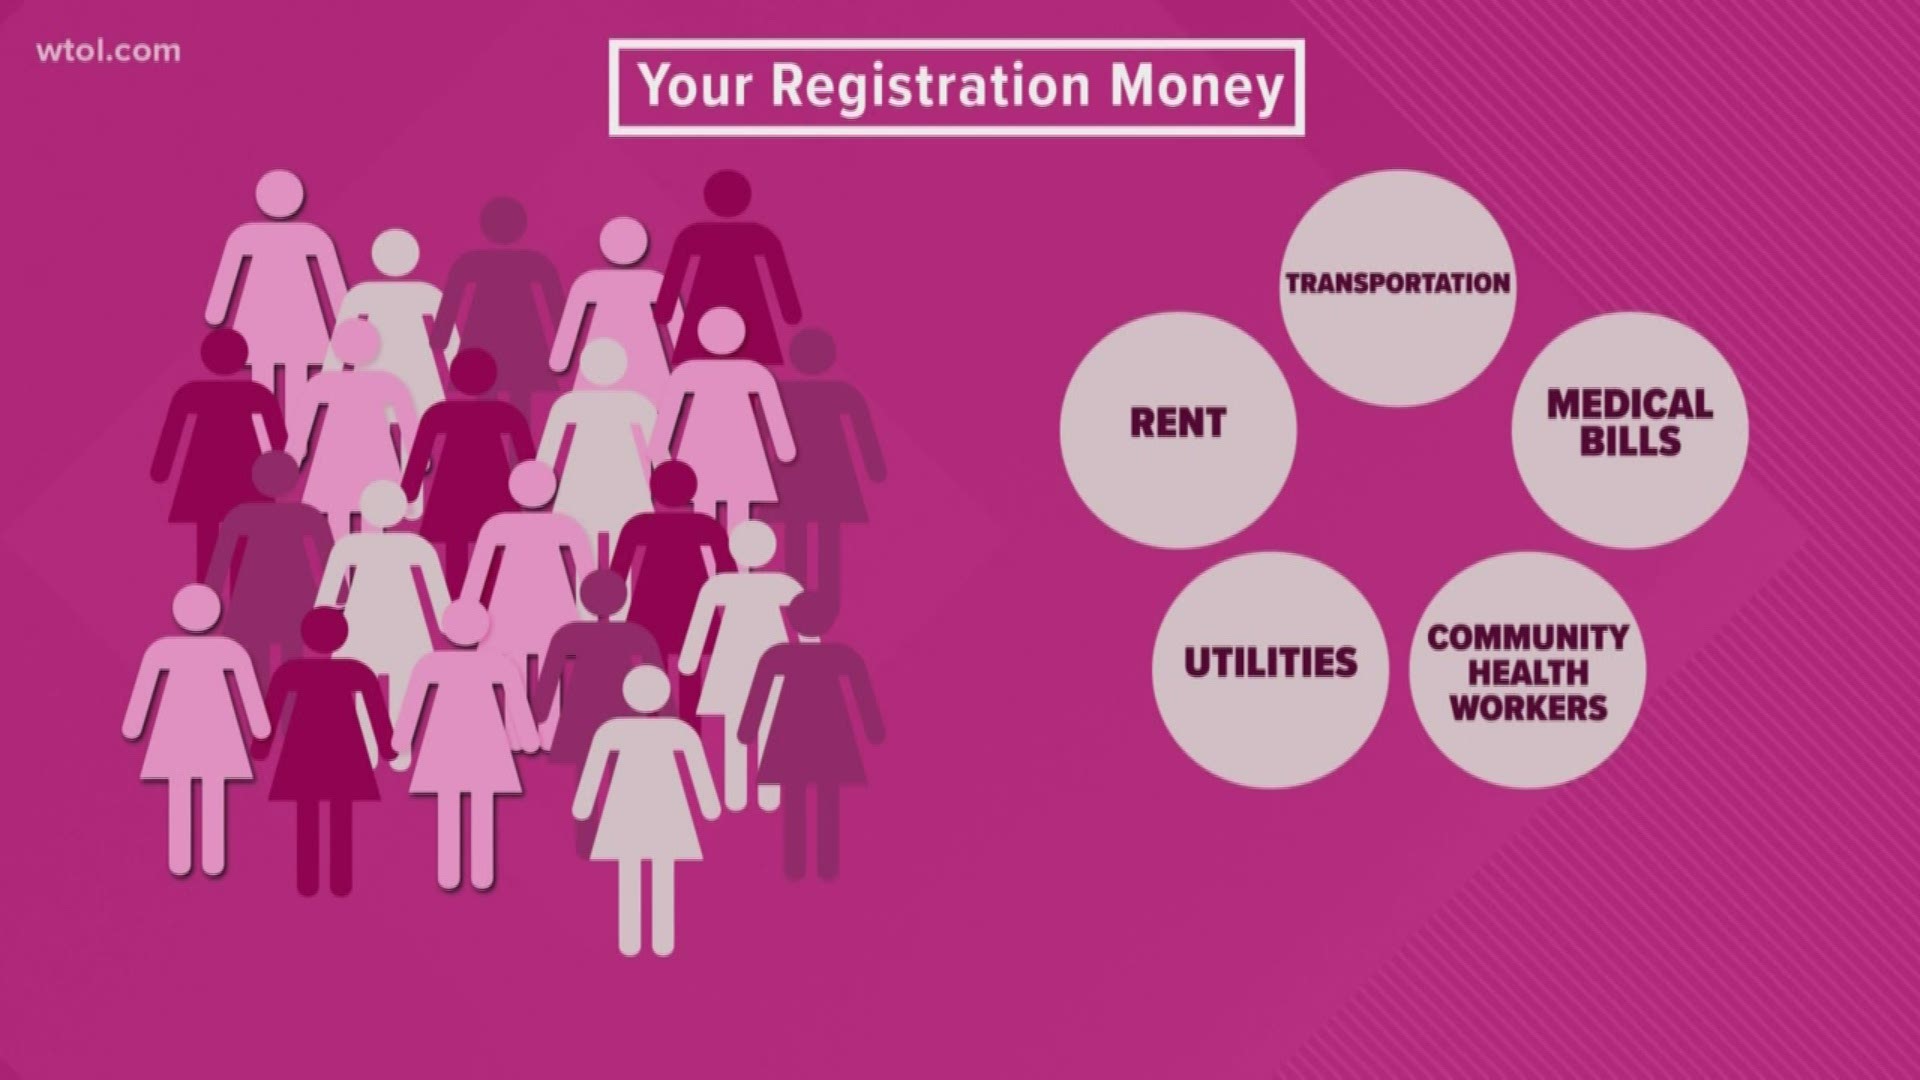 Komen receives Race for the Cure registration dollars and distributes them to groups that help survivors pay for things like rent, utilities, testing costs, bills.